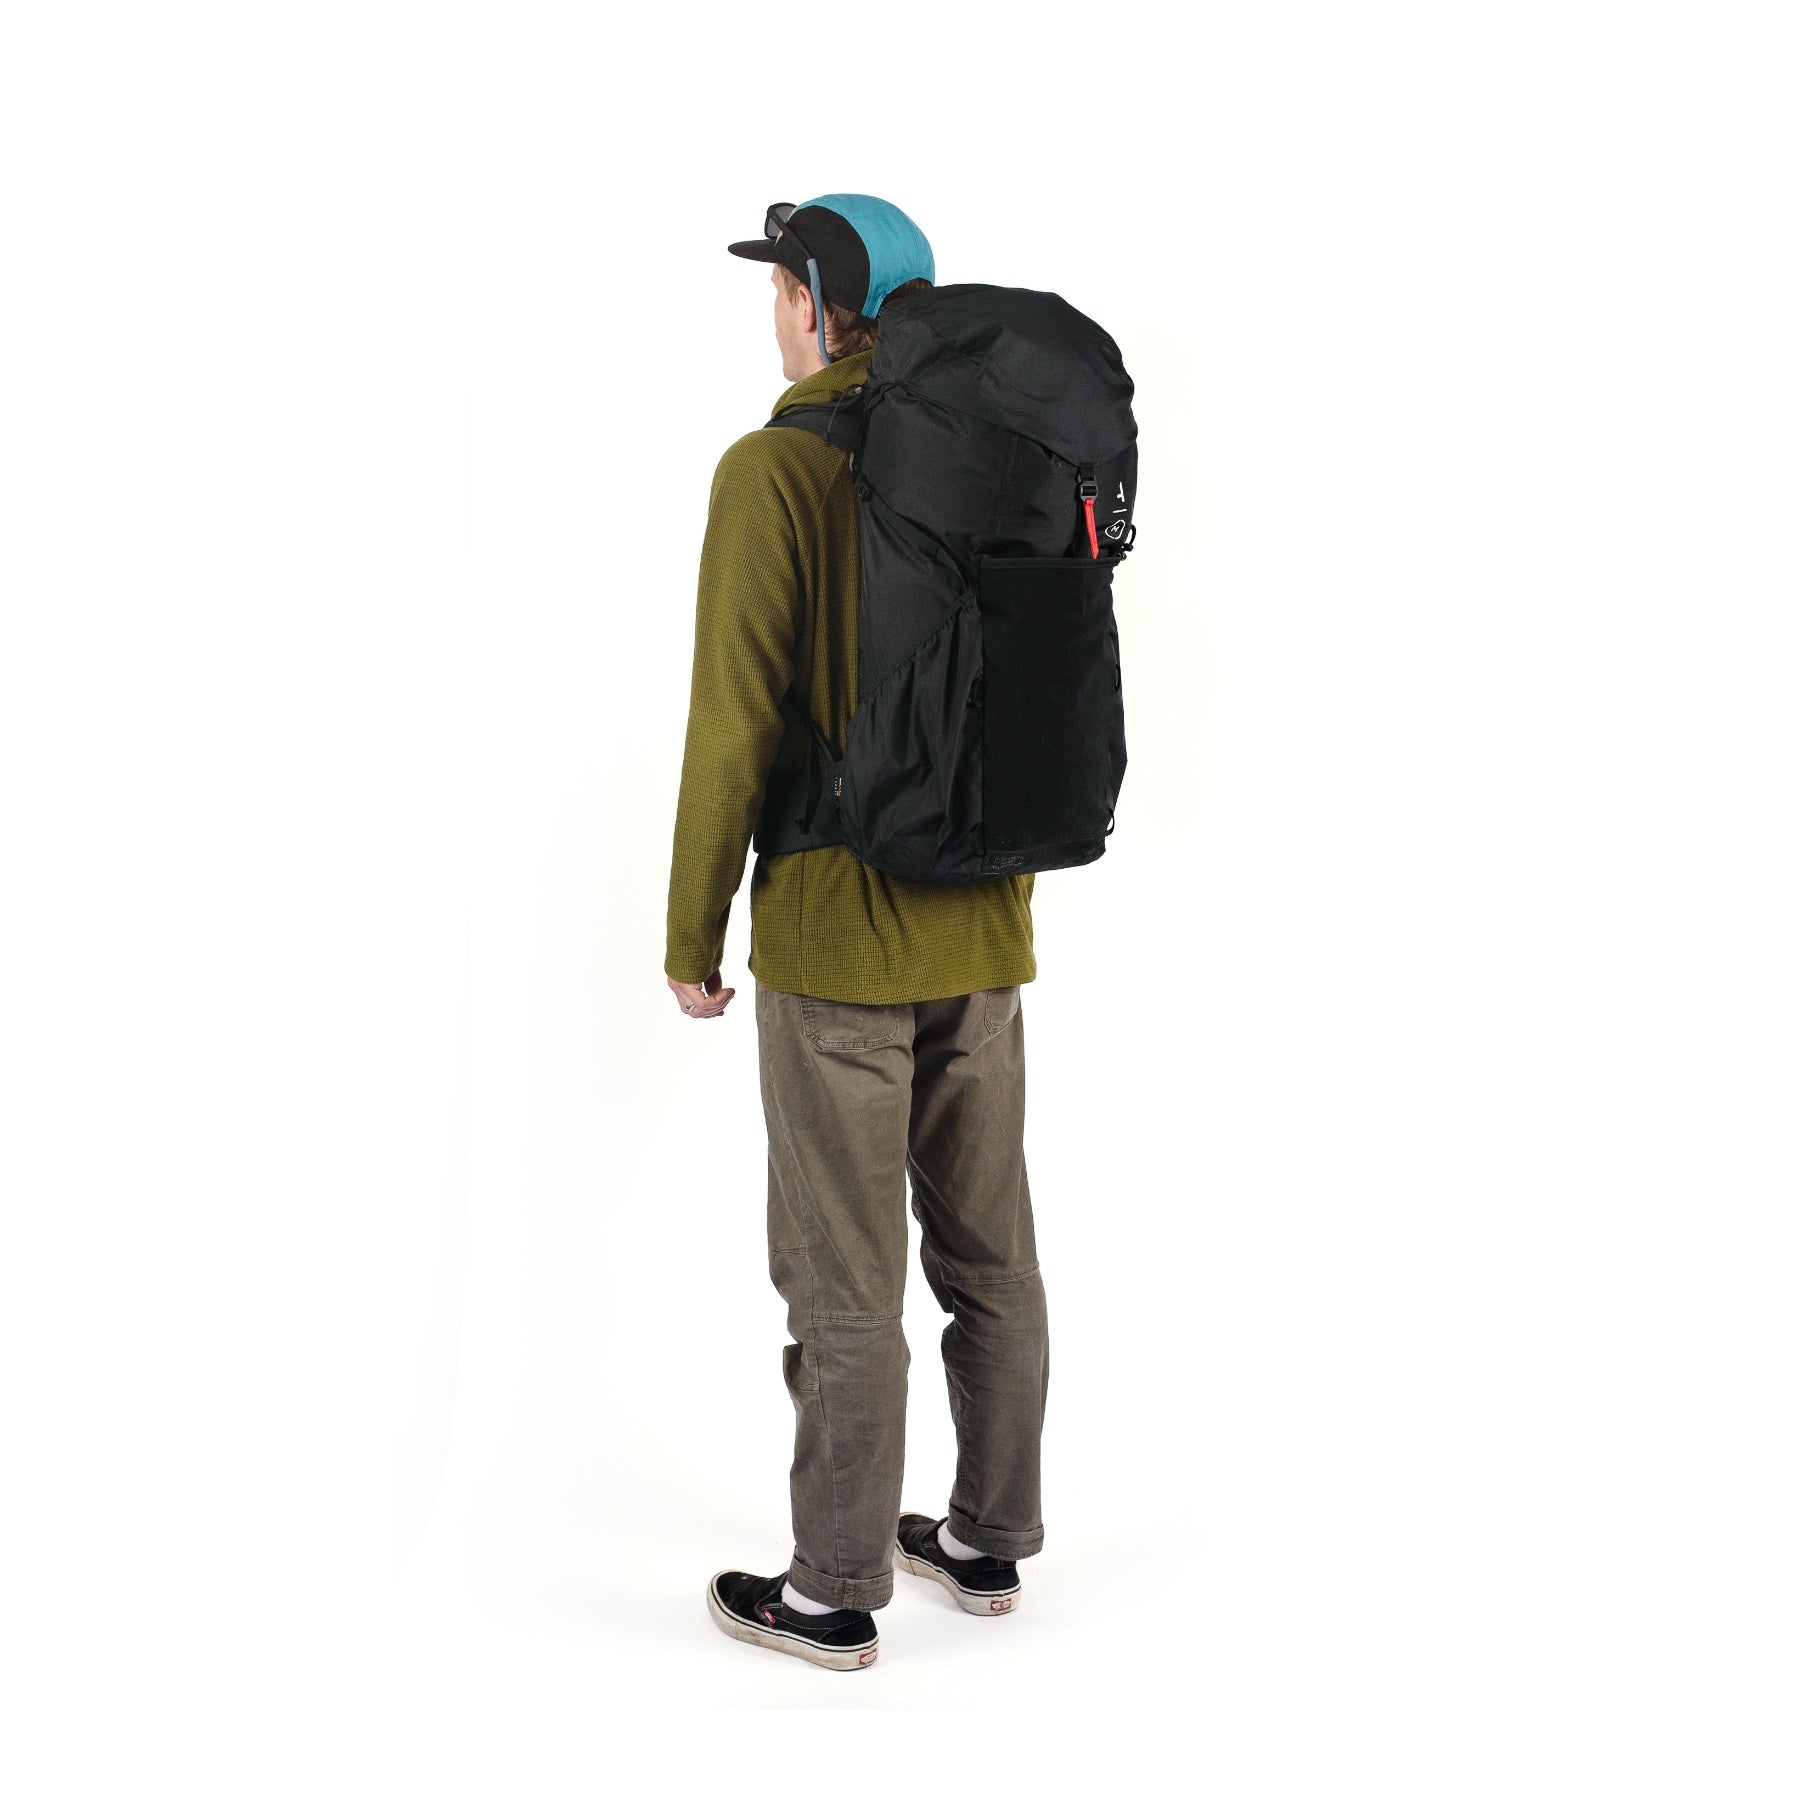 Moment Strohl Mountain Light 45L Backpack - The Usual